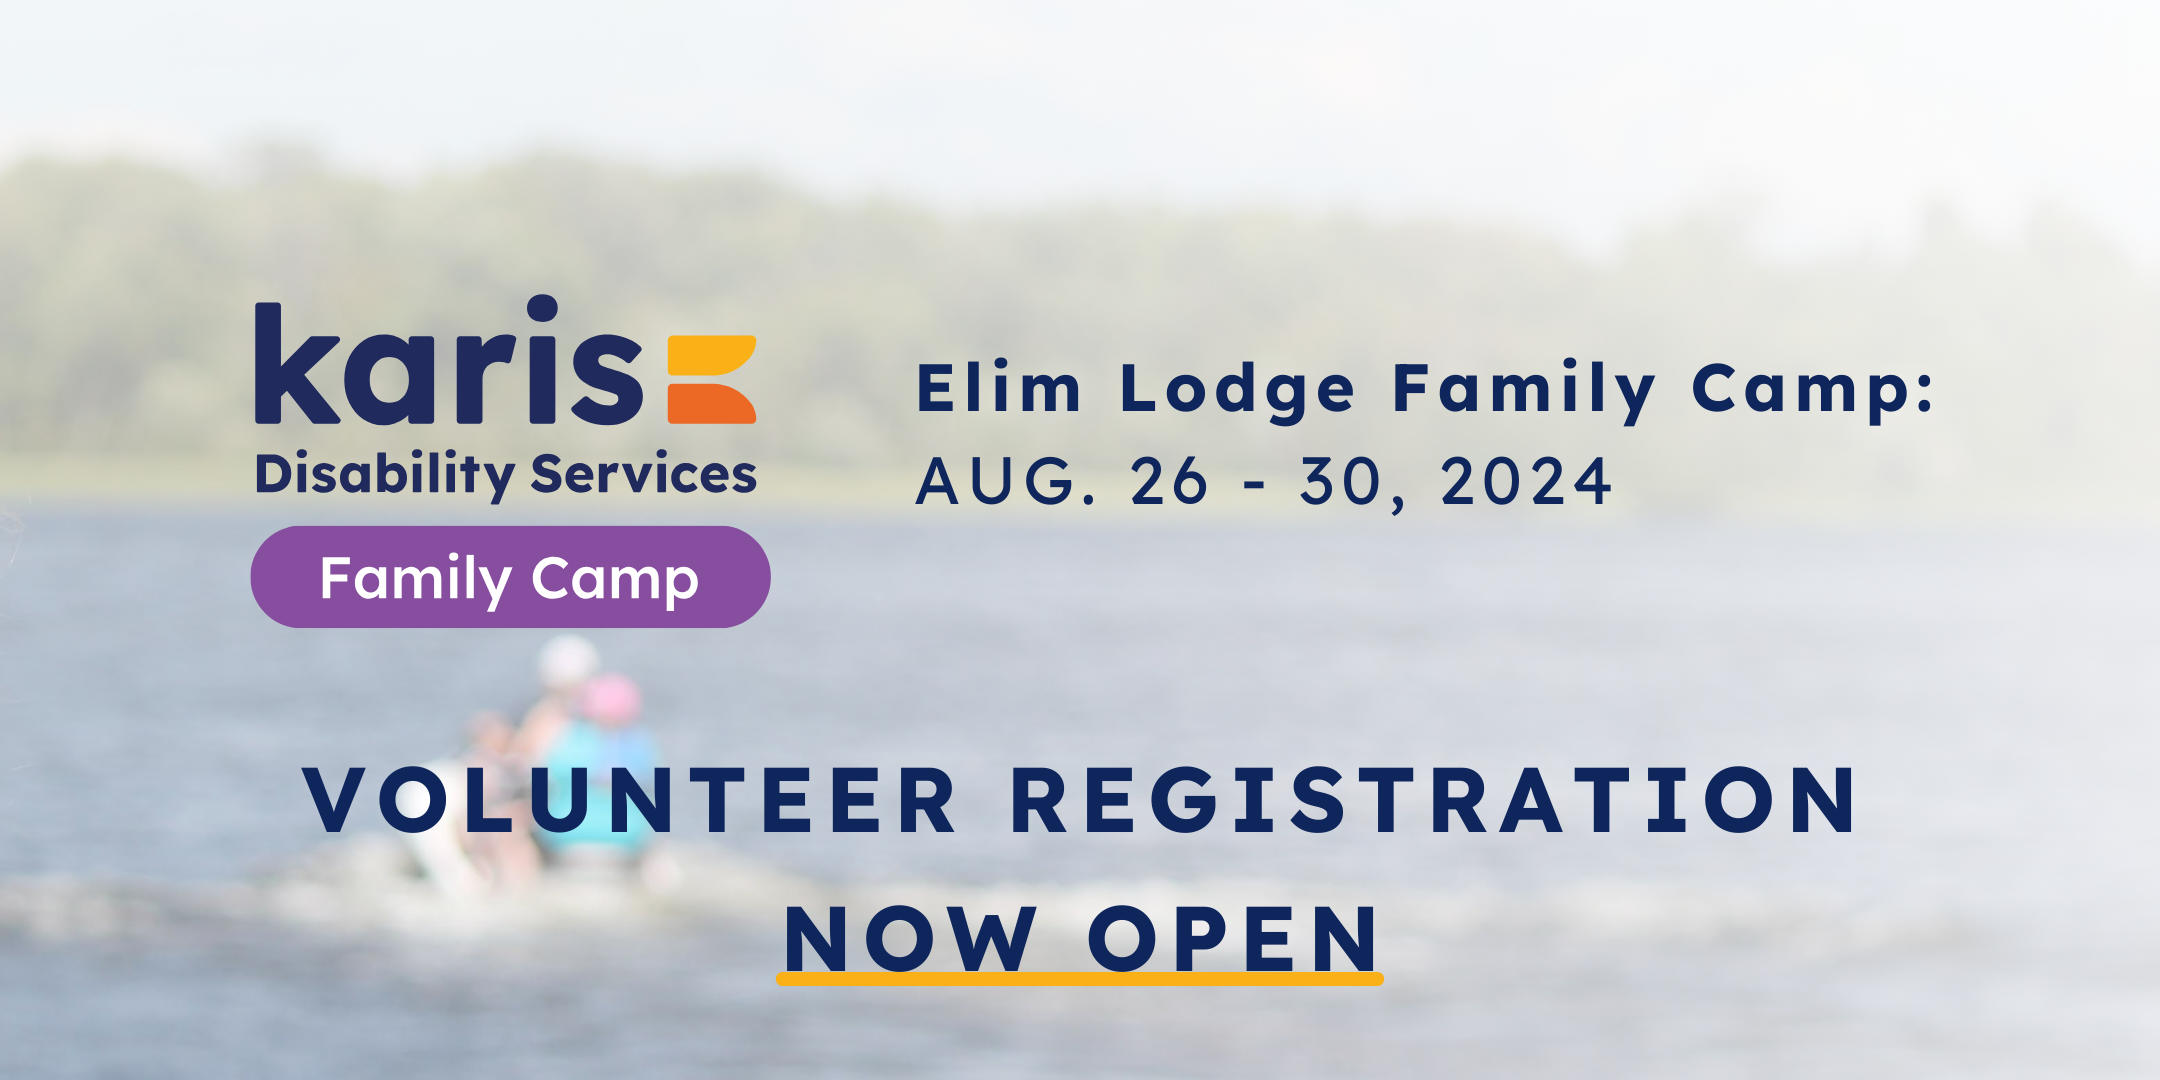 Karis Disability Services Family Camp. Elim Lodge Family Camp: Aug. 26 -30, 2024. Volunteer registration now open. 